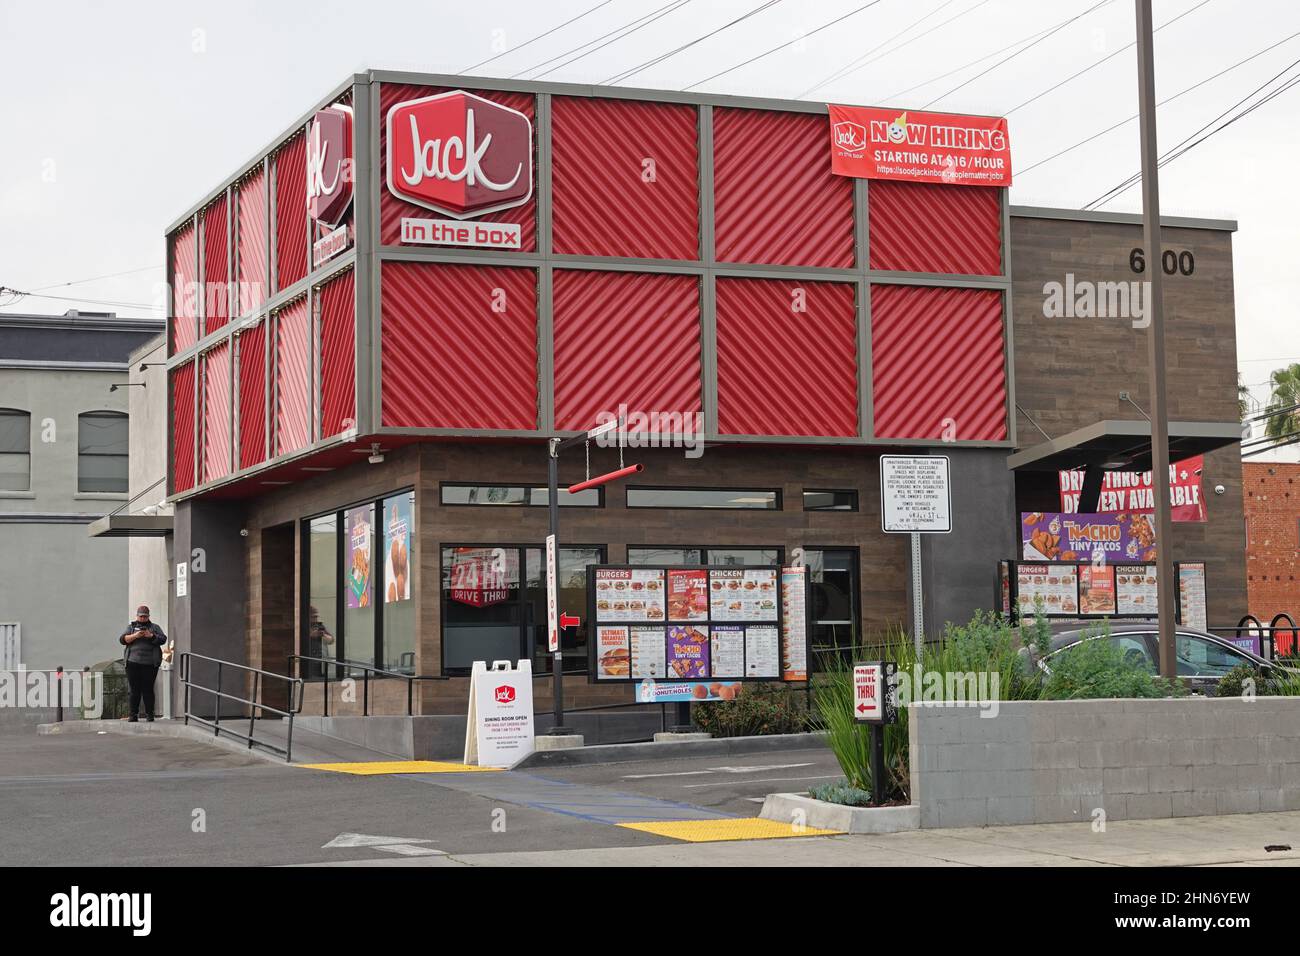 Hollywood, CA / USA - Jan. 31, 2022: A Jack in the Box fast food restaurant is shown from the exterior during the afternoon. Stock Photo